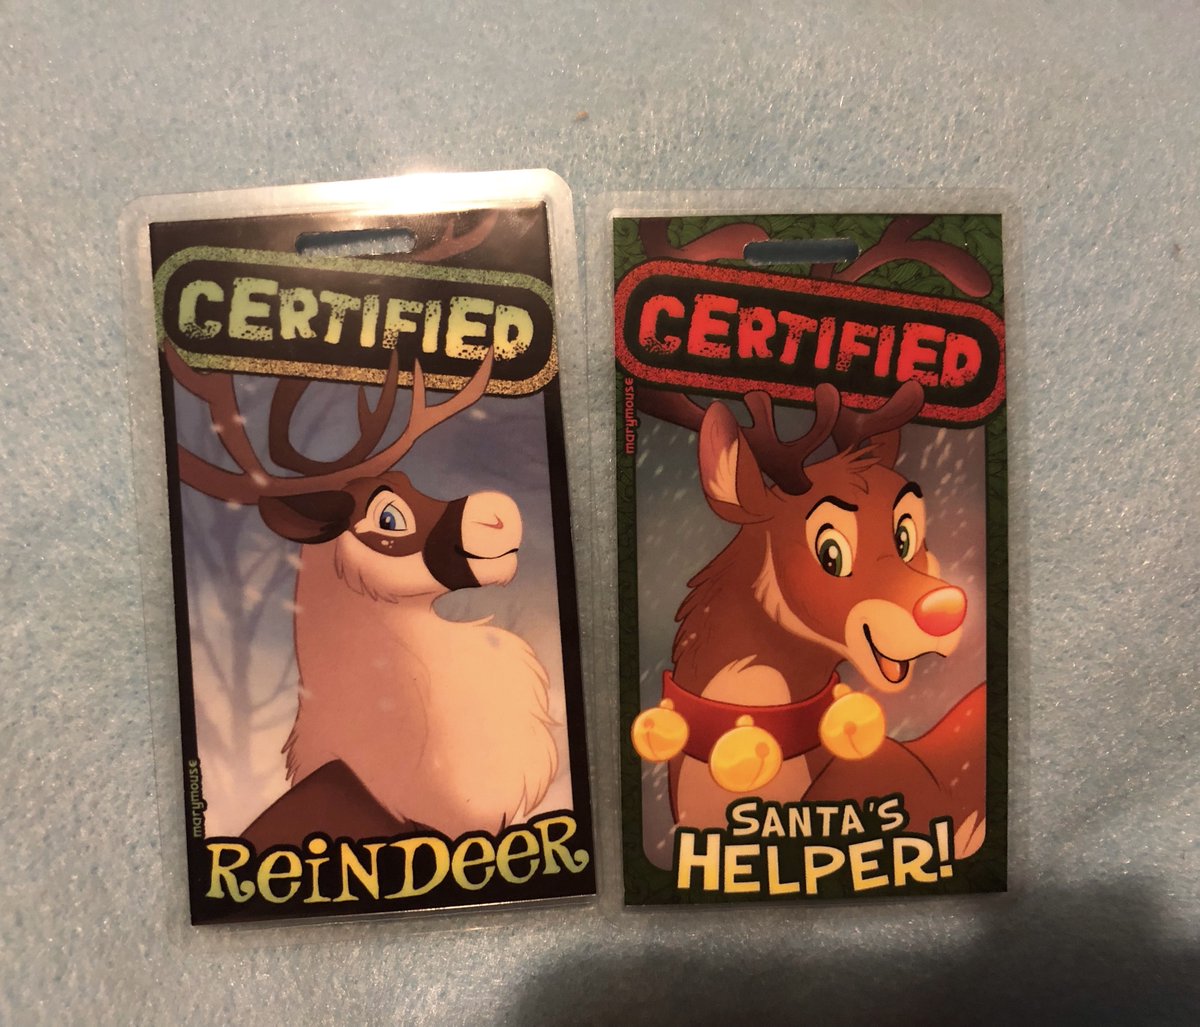 I have wanted these badges since I first created Sleigh! I am also making my duct tape dummy this month, I still can’t believe I’m getting a fursuit. Can’t wait to be a cute  reindeer! 🦌🛷